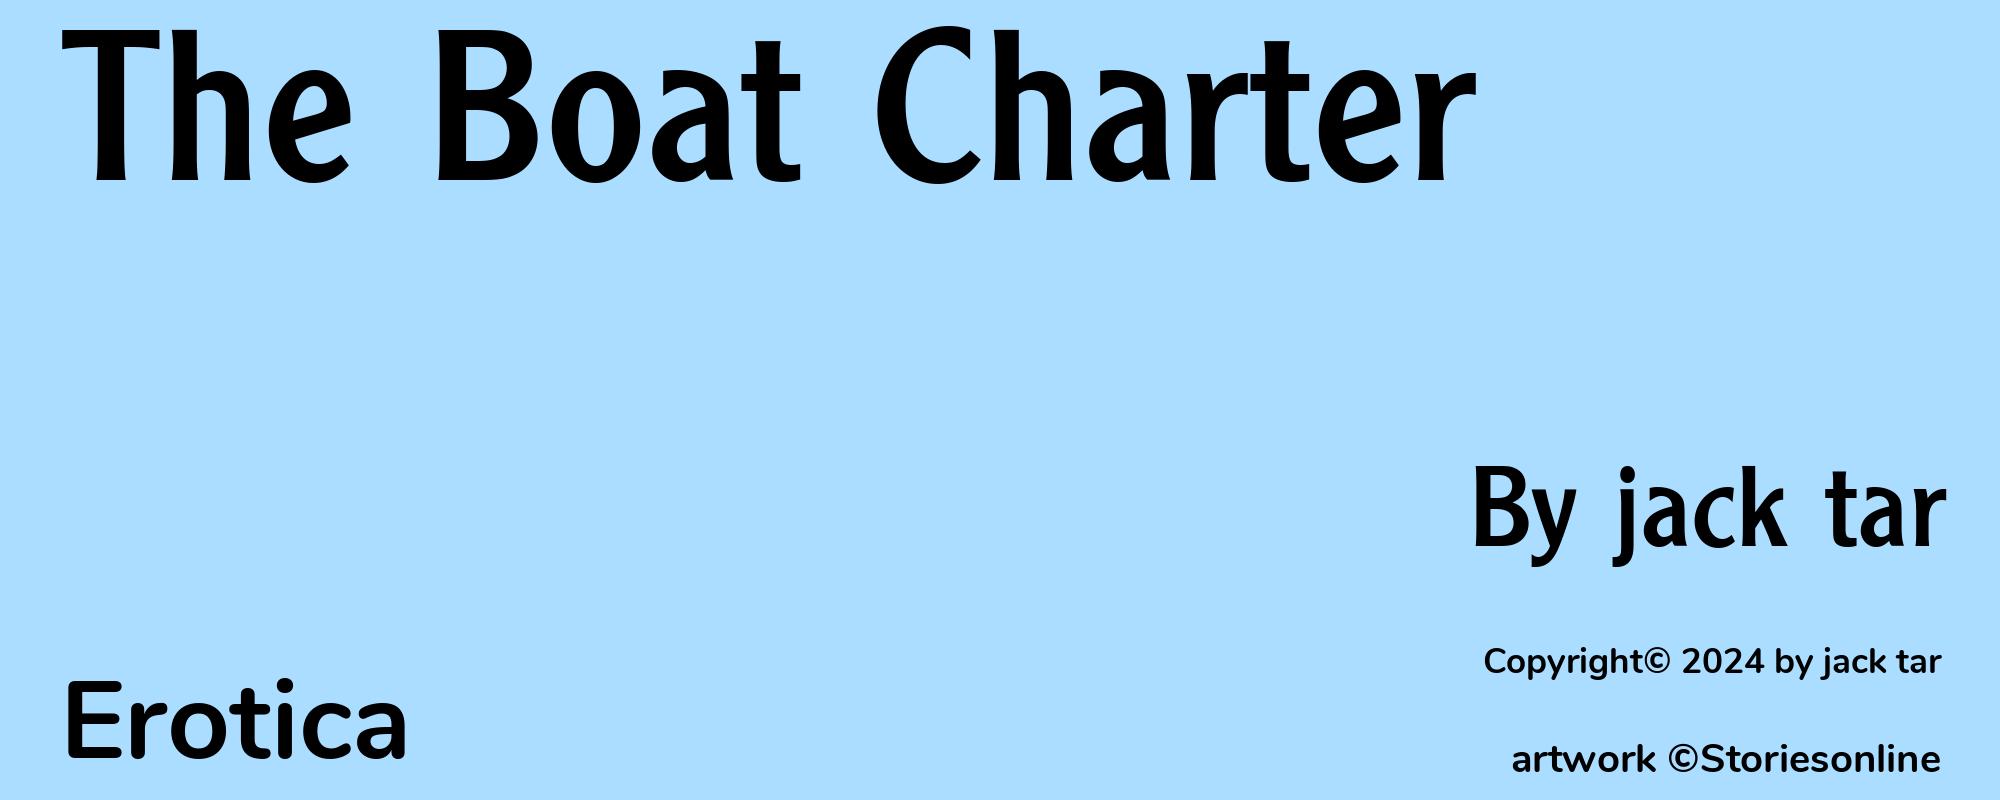 The Boat Charter - Cover